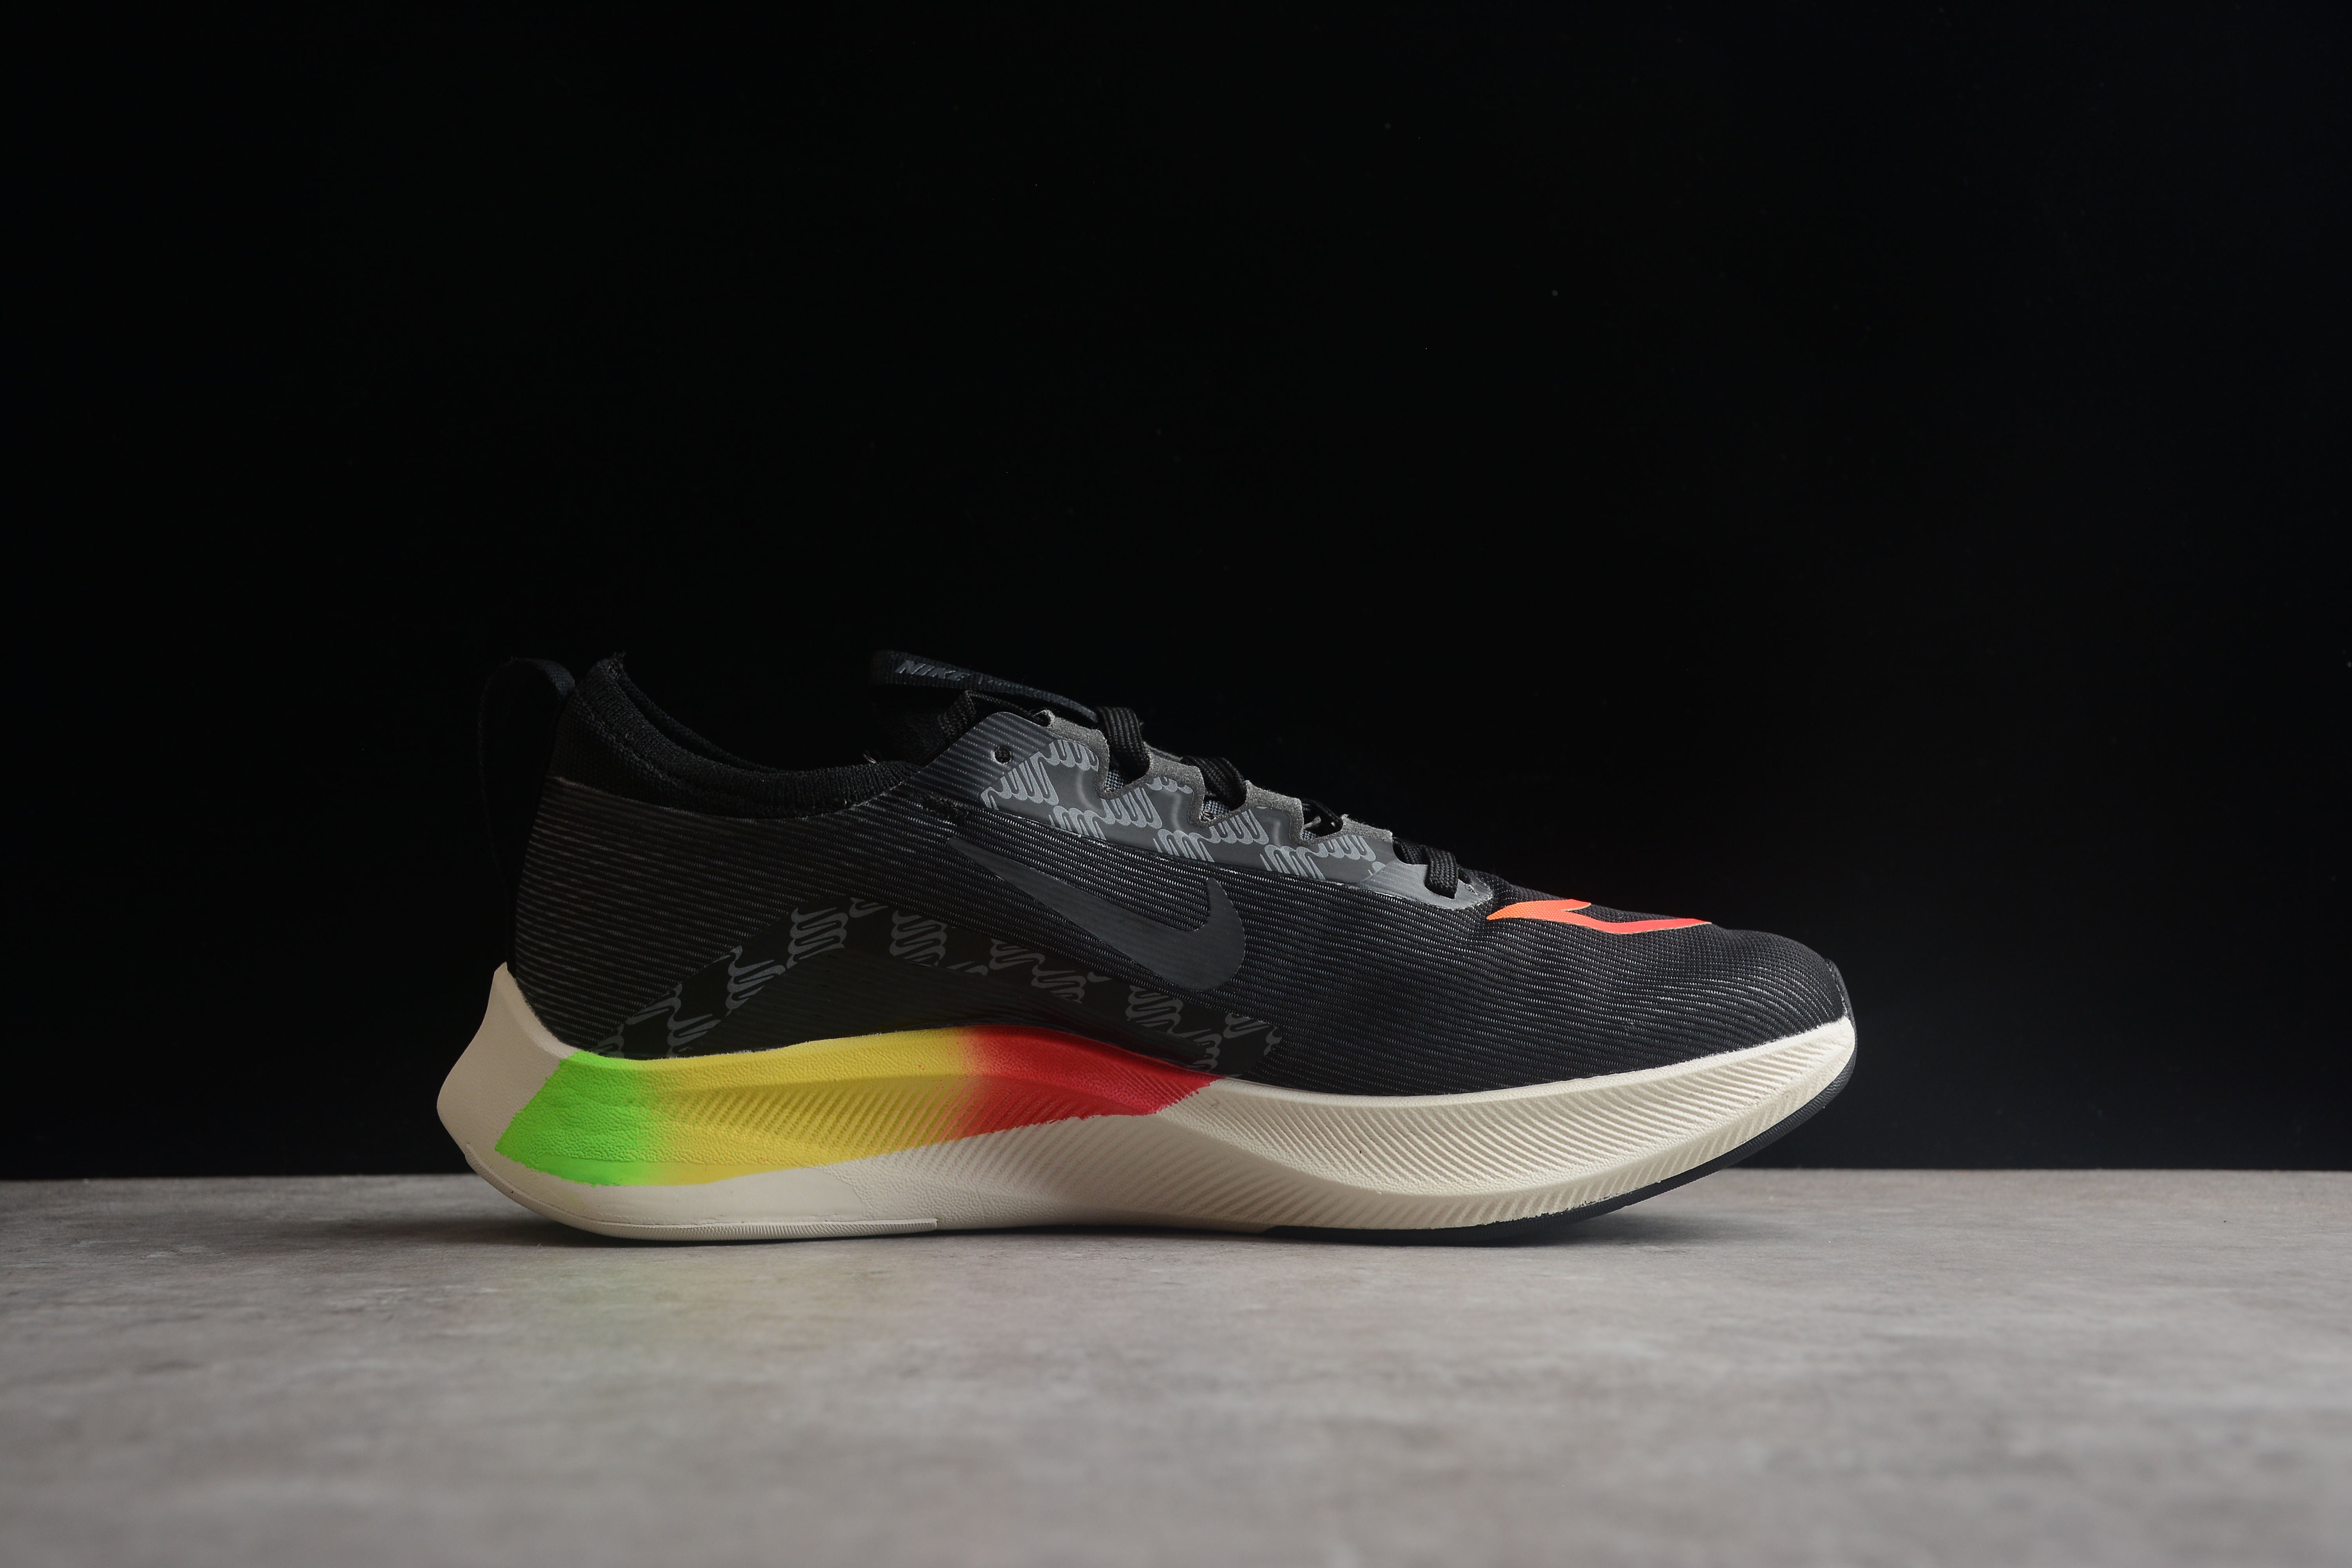 NK zoom Fly 5 black afro